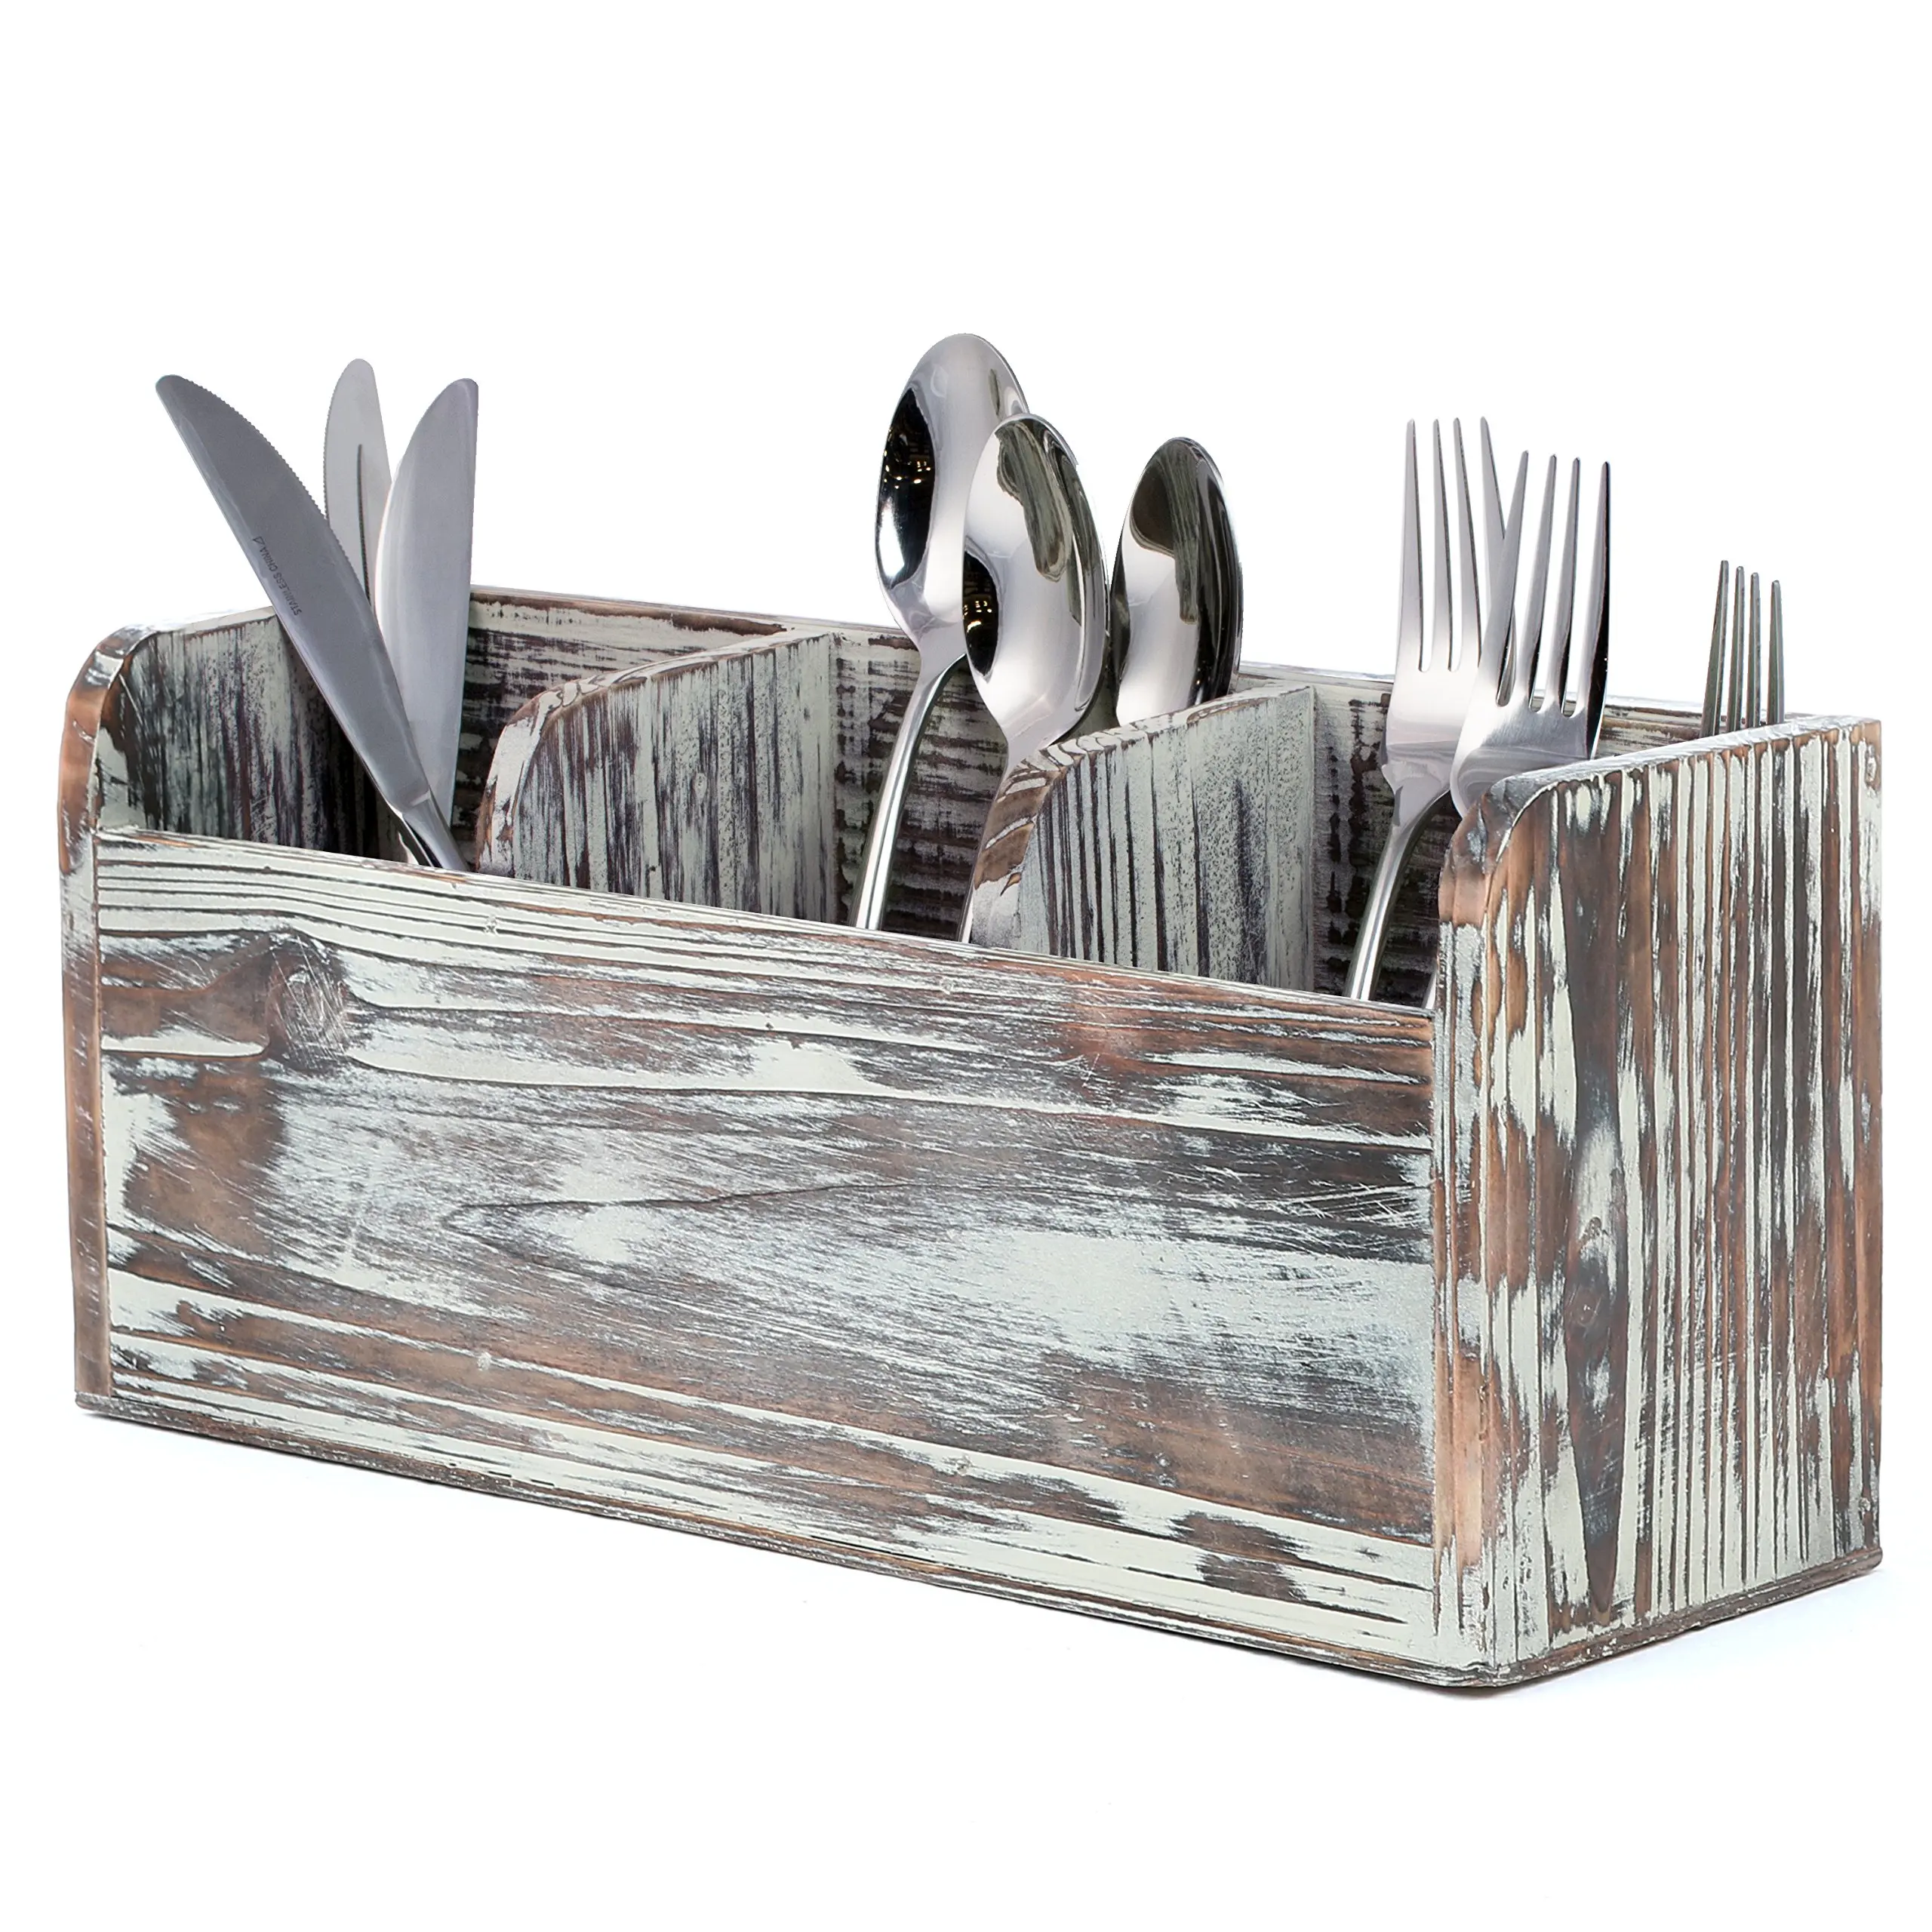 Home Flatware Organizer Caddy With Wood Base Sus304 Stainless